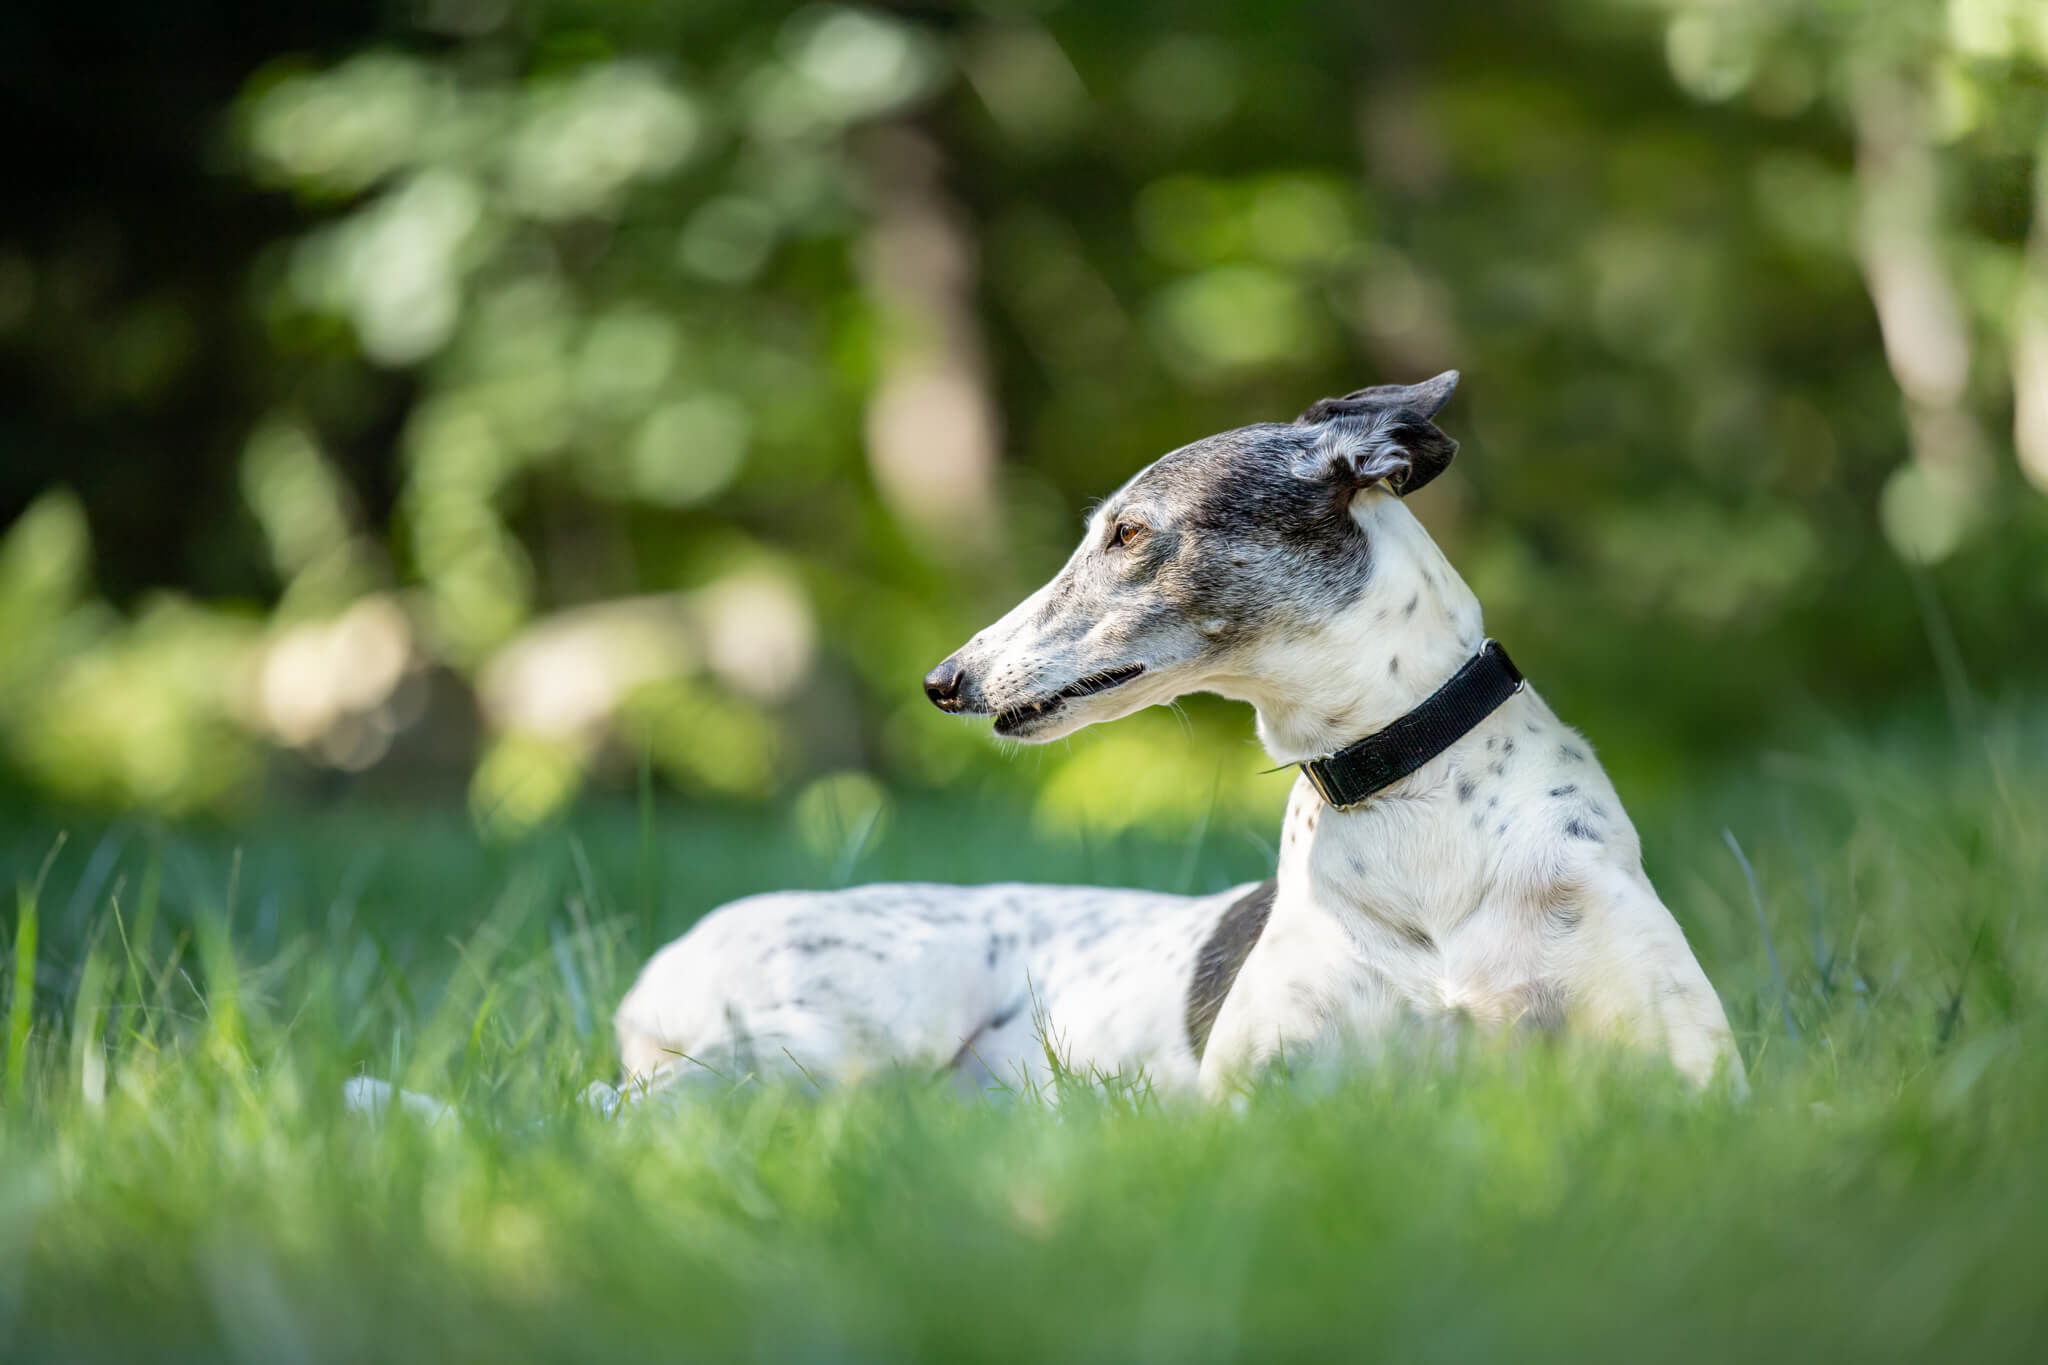 A white and spotted dog lays in the sun in a grassy field with a black collar